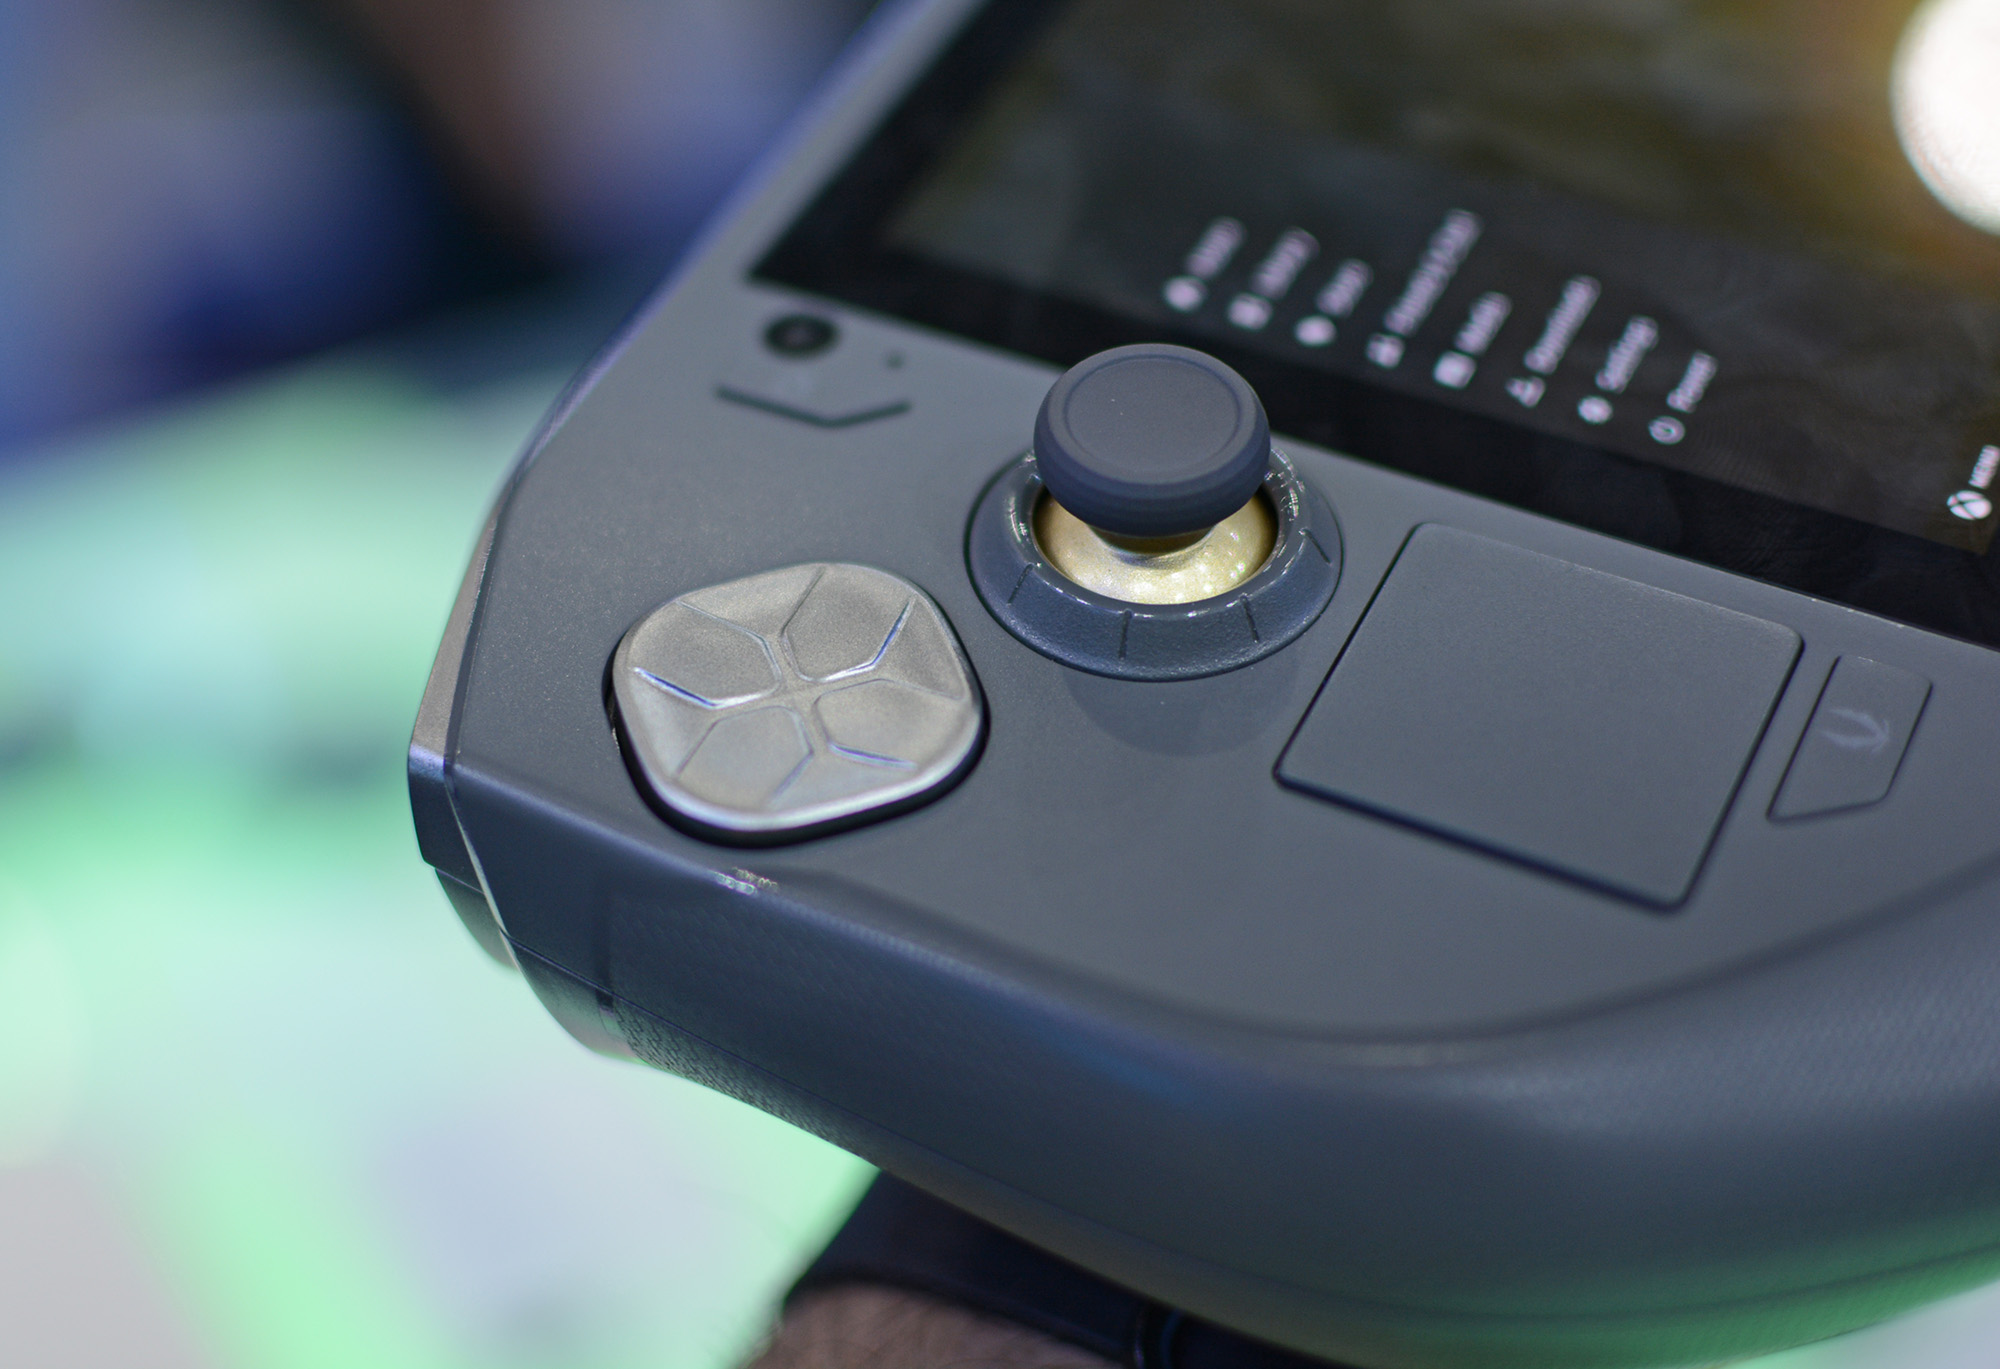 The Hall-effect joystick and D-pad on the Zotac Zone handheld gaming console.